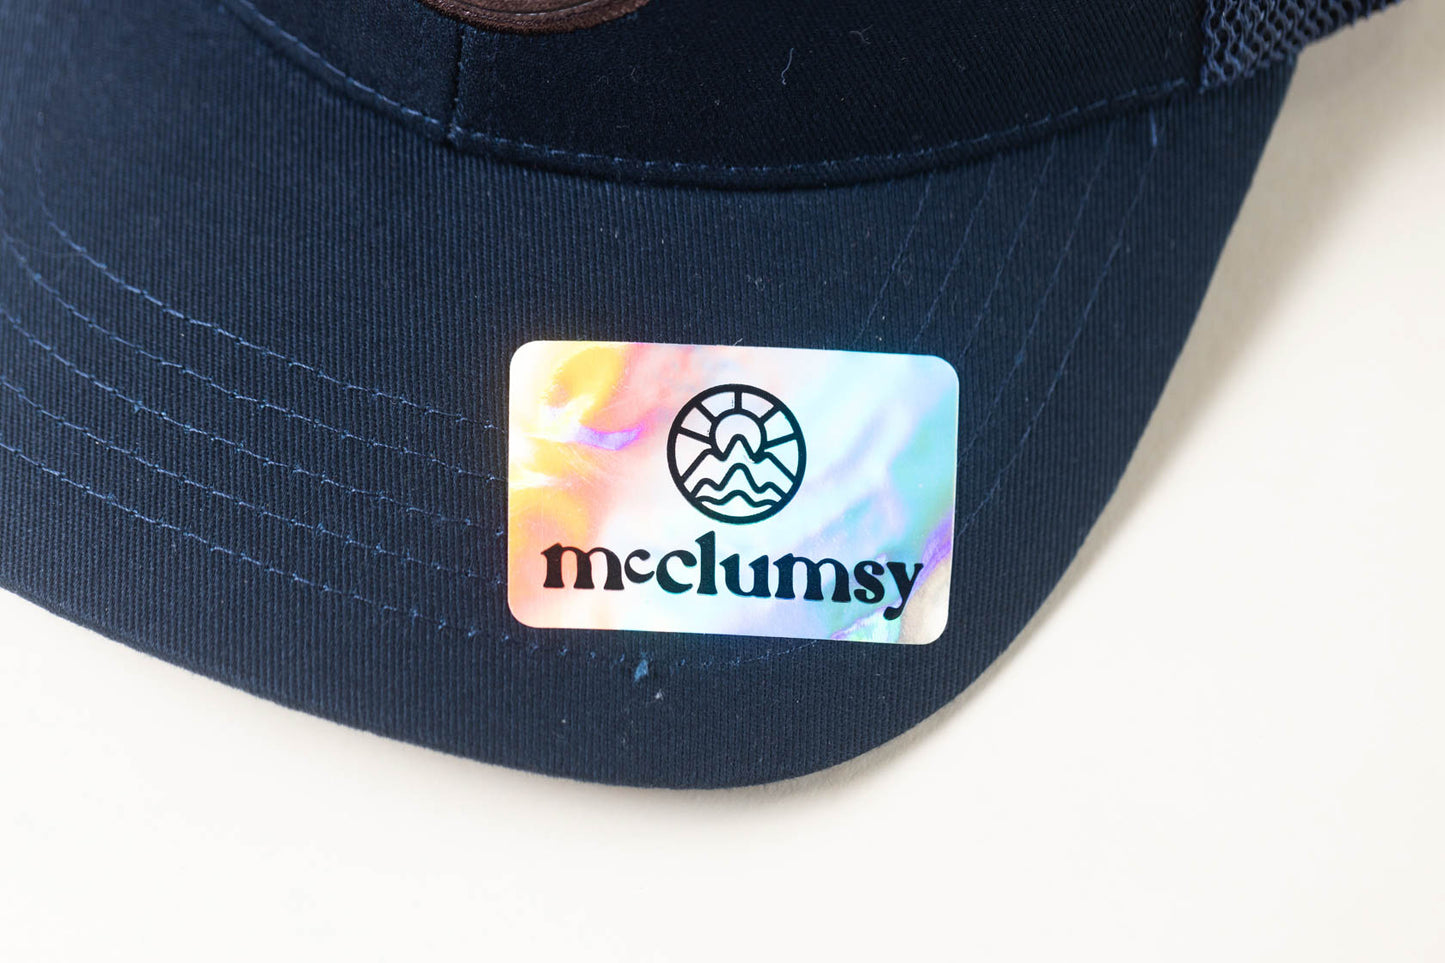 Trucker Hat - 6 Panel Hat with Suede Leather McClumsy Patch - Navy